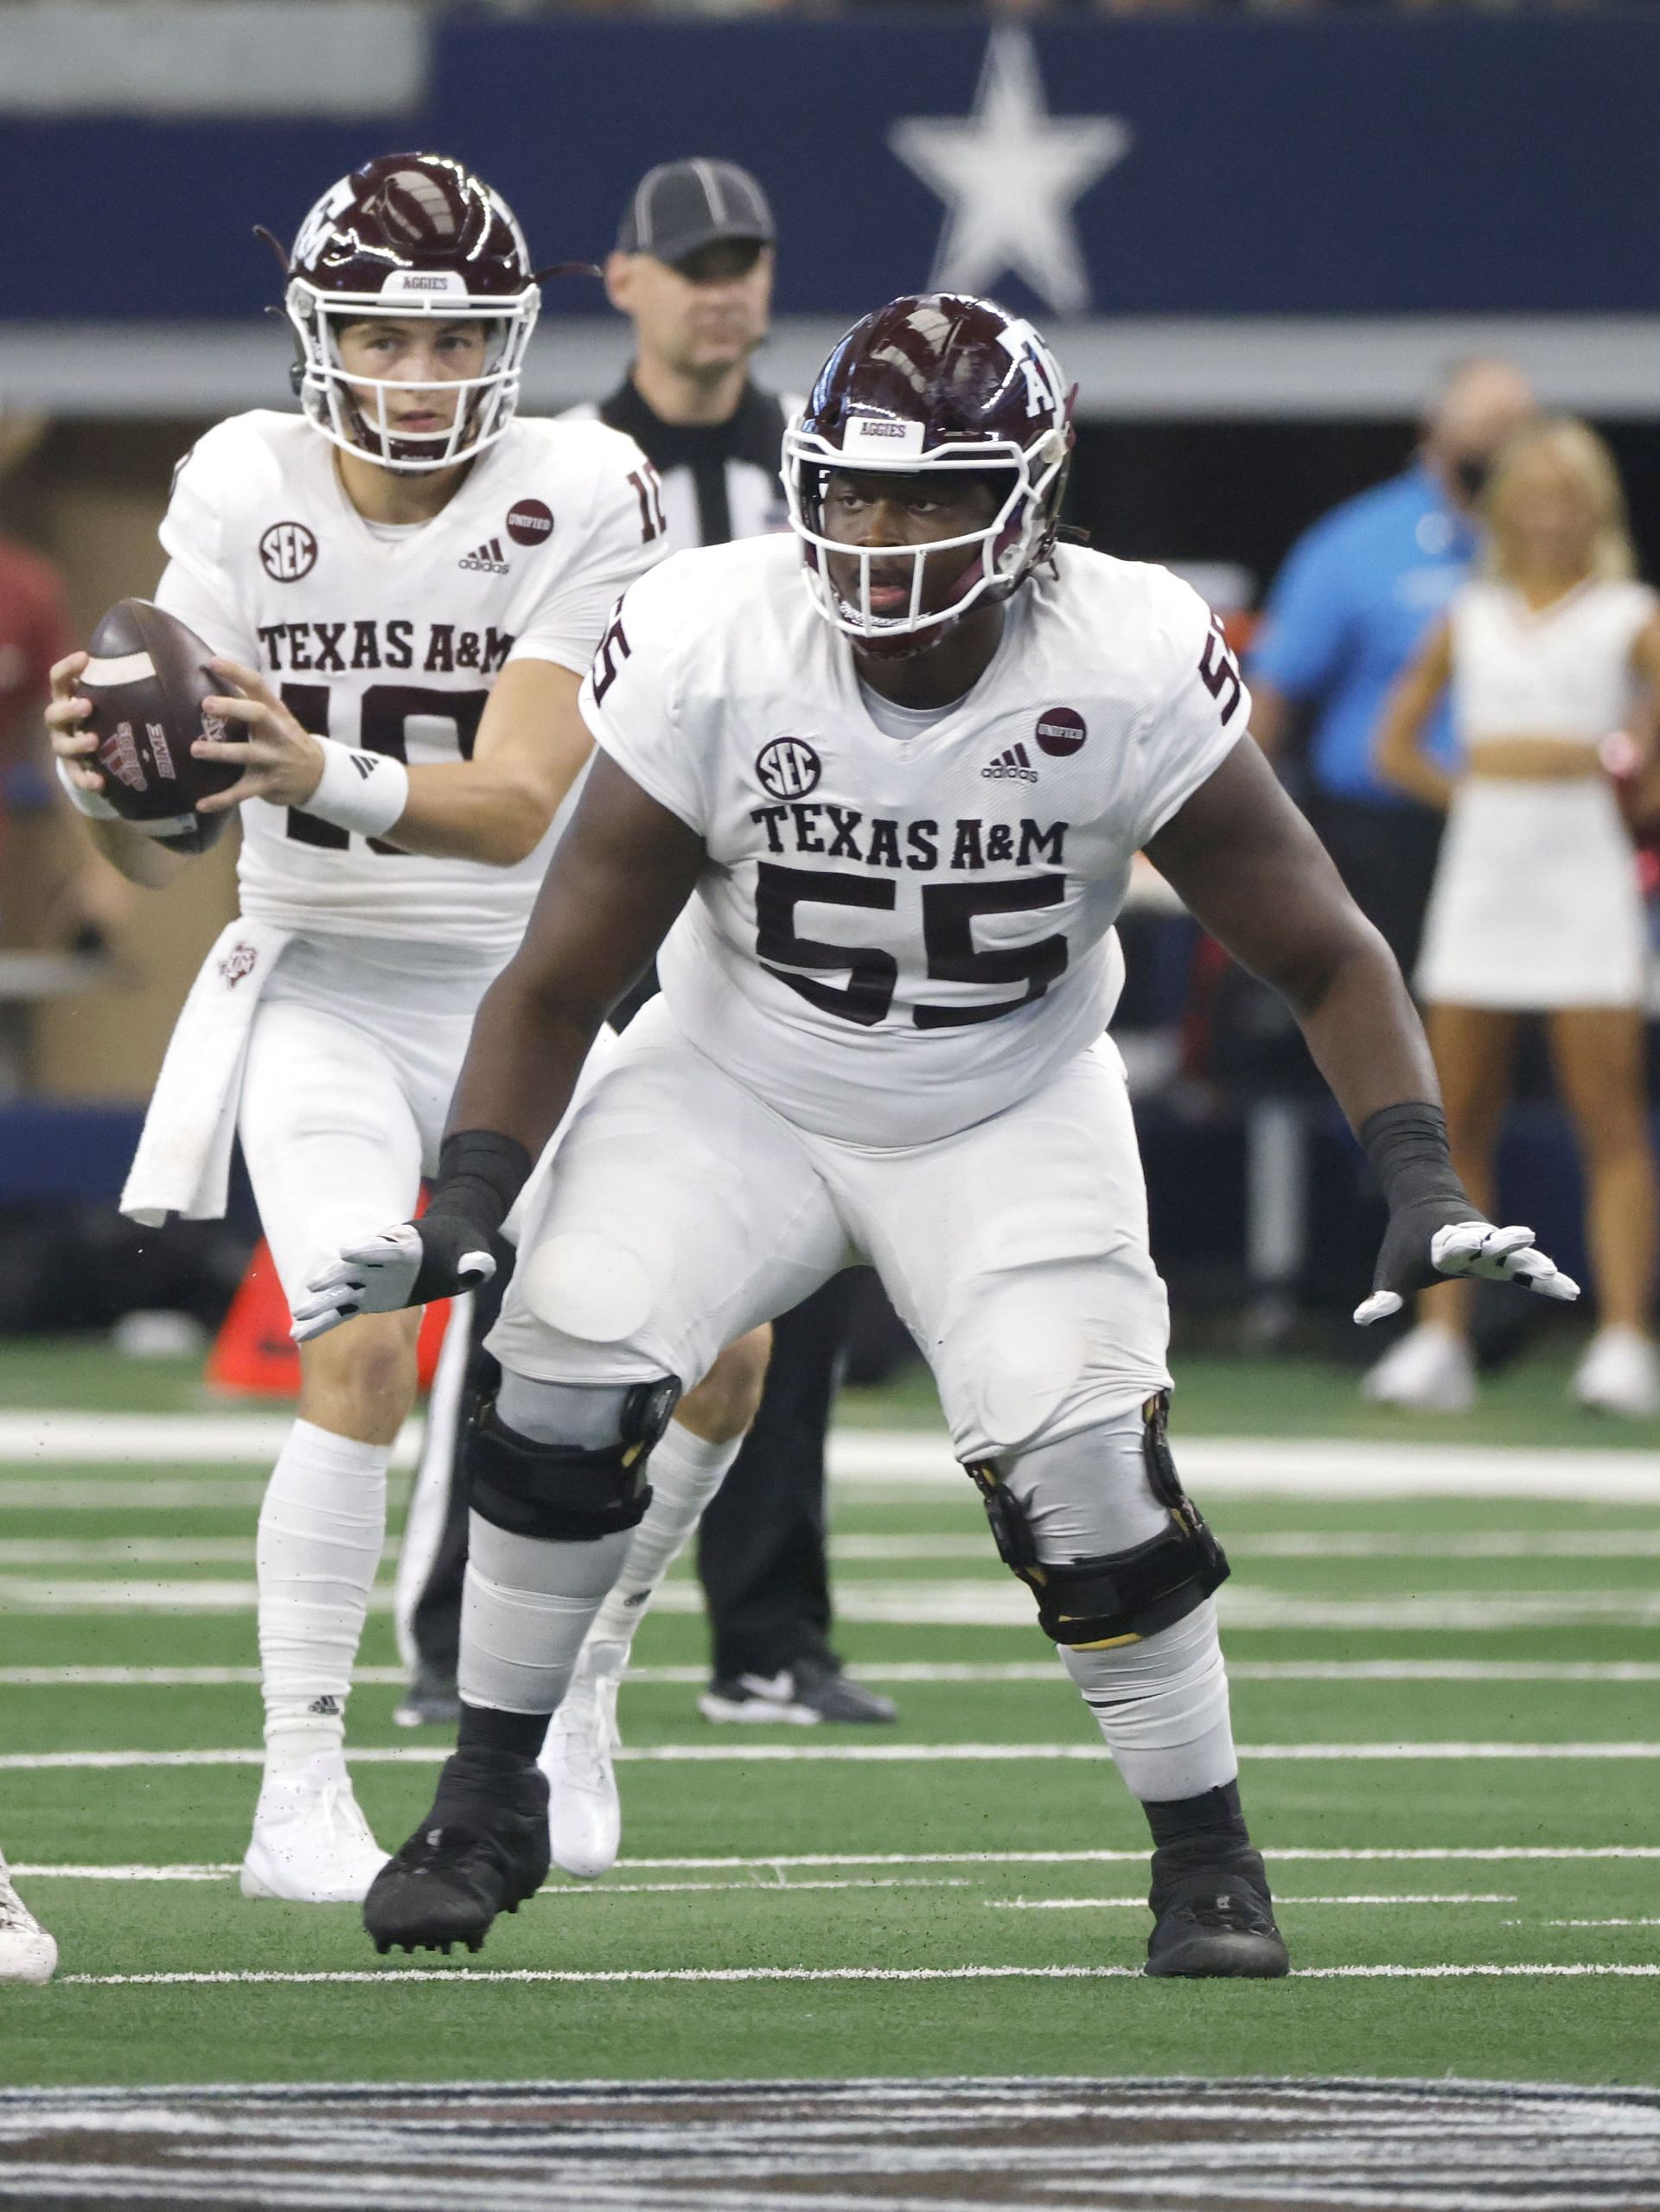 Kenyon Green #55 of the Texas A&amp;M Aggies plays against the Arkansas Razorbacks in the first half of the Southwest Classic at AT&amp;T Stadium on September 25, 2021 in Arlington, Texas. Arkansas won 20-10.